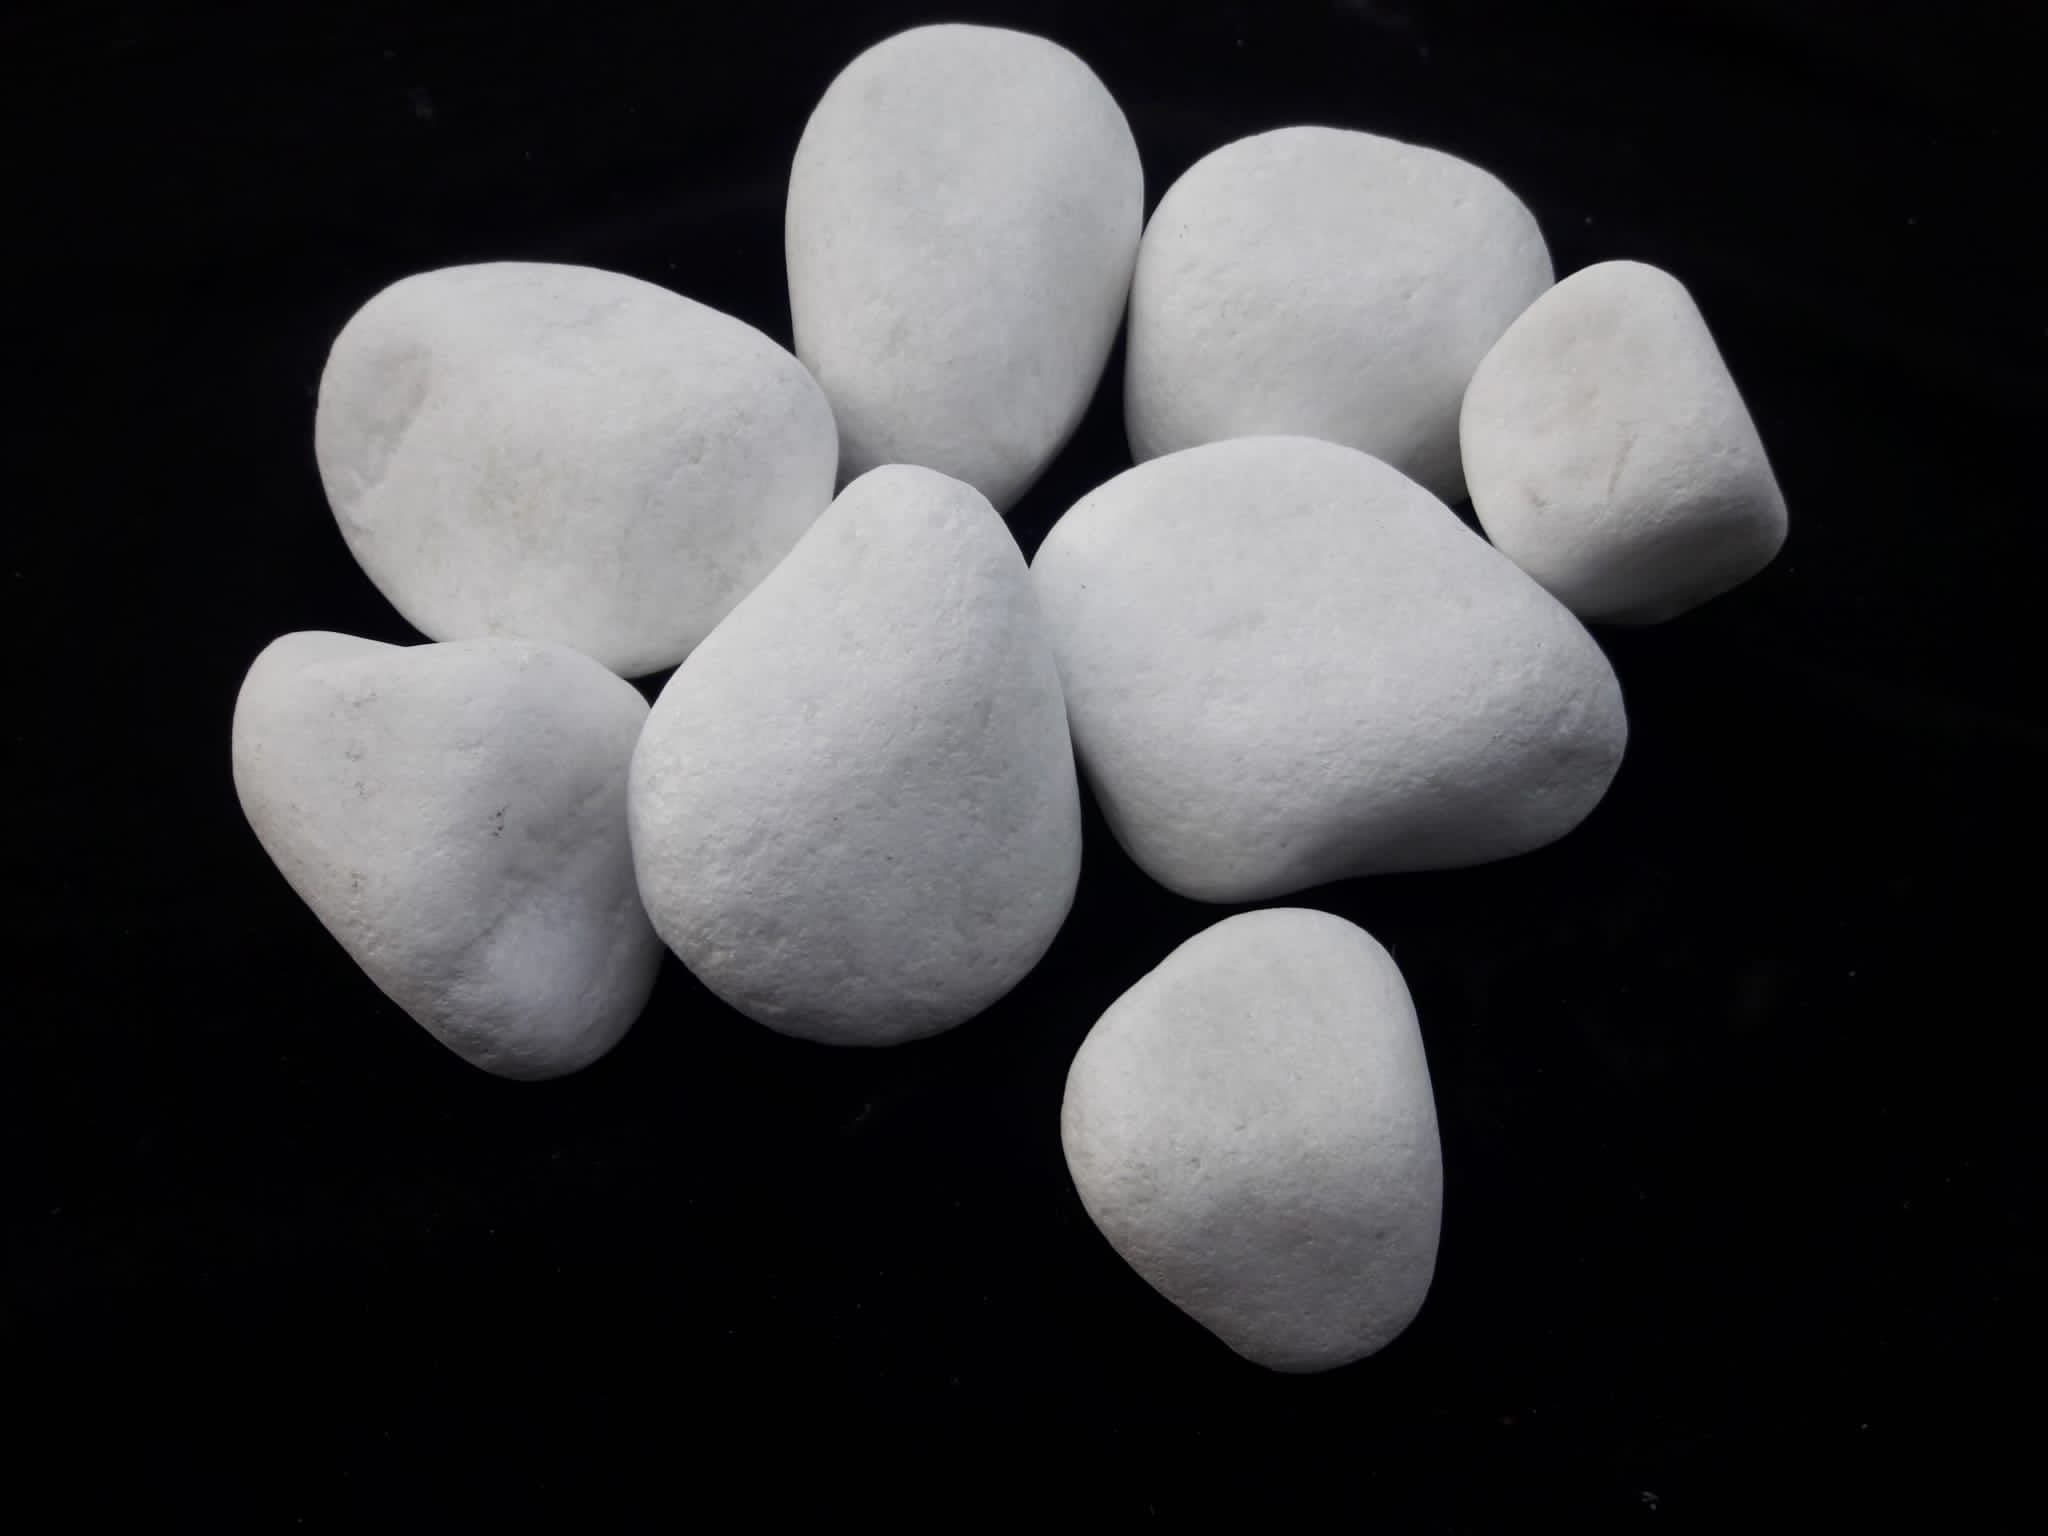 White Rainforest Pebble Stones 1 to 2 inches - 3000 LBS